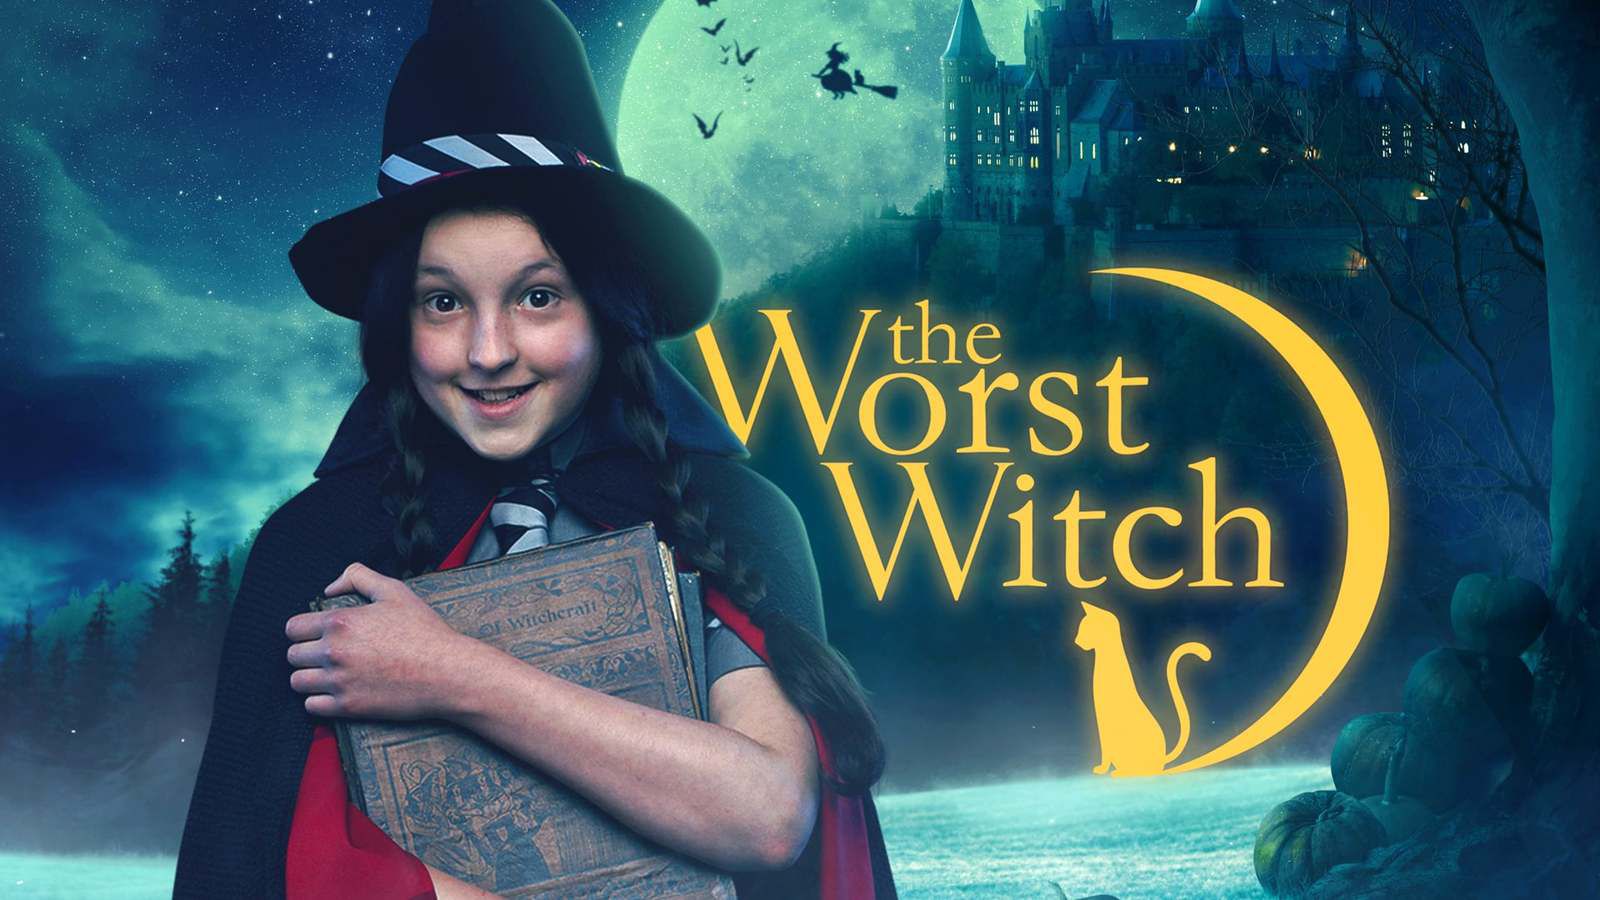 The Worst Witch 4x13 Season 4 Episode 13 [HD] “The Witching Hour